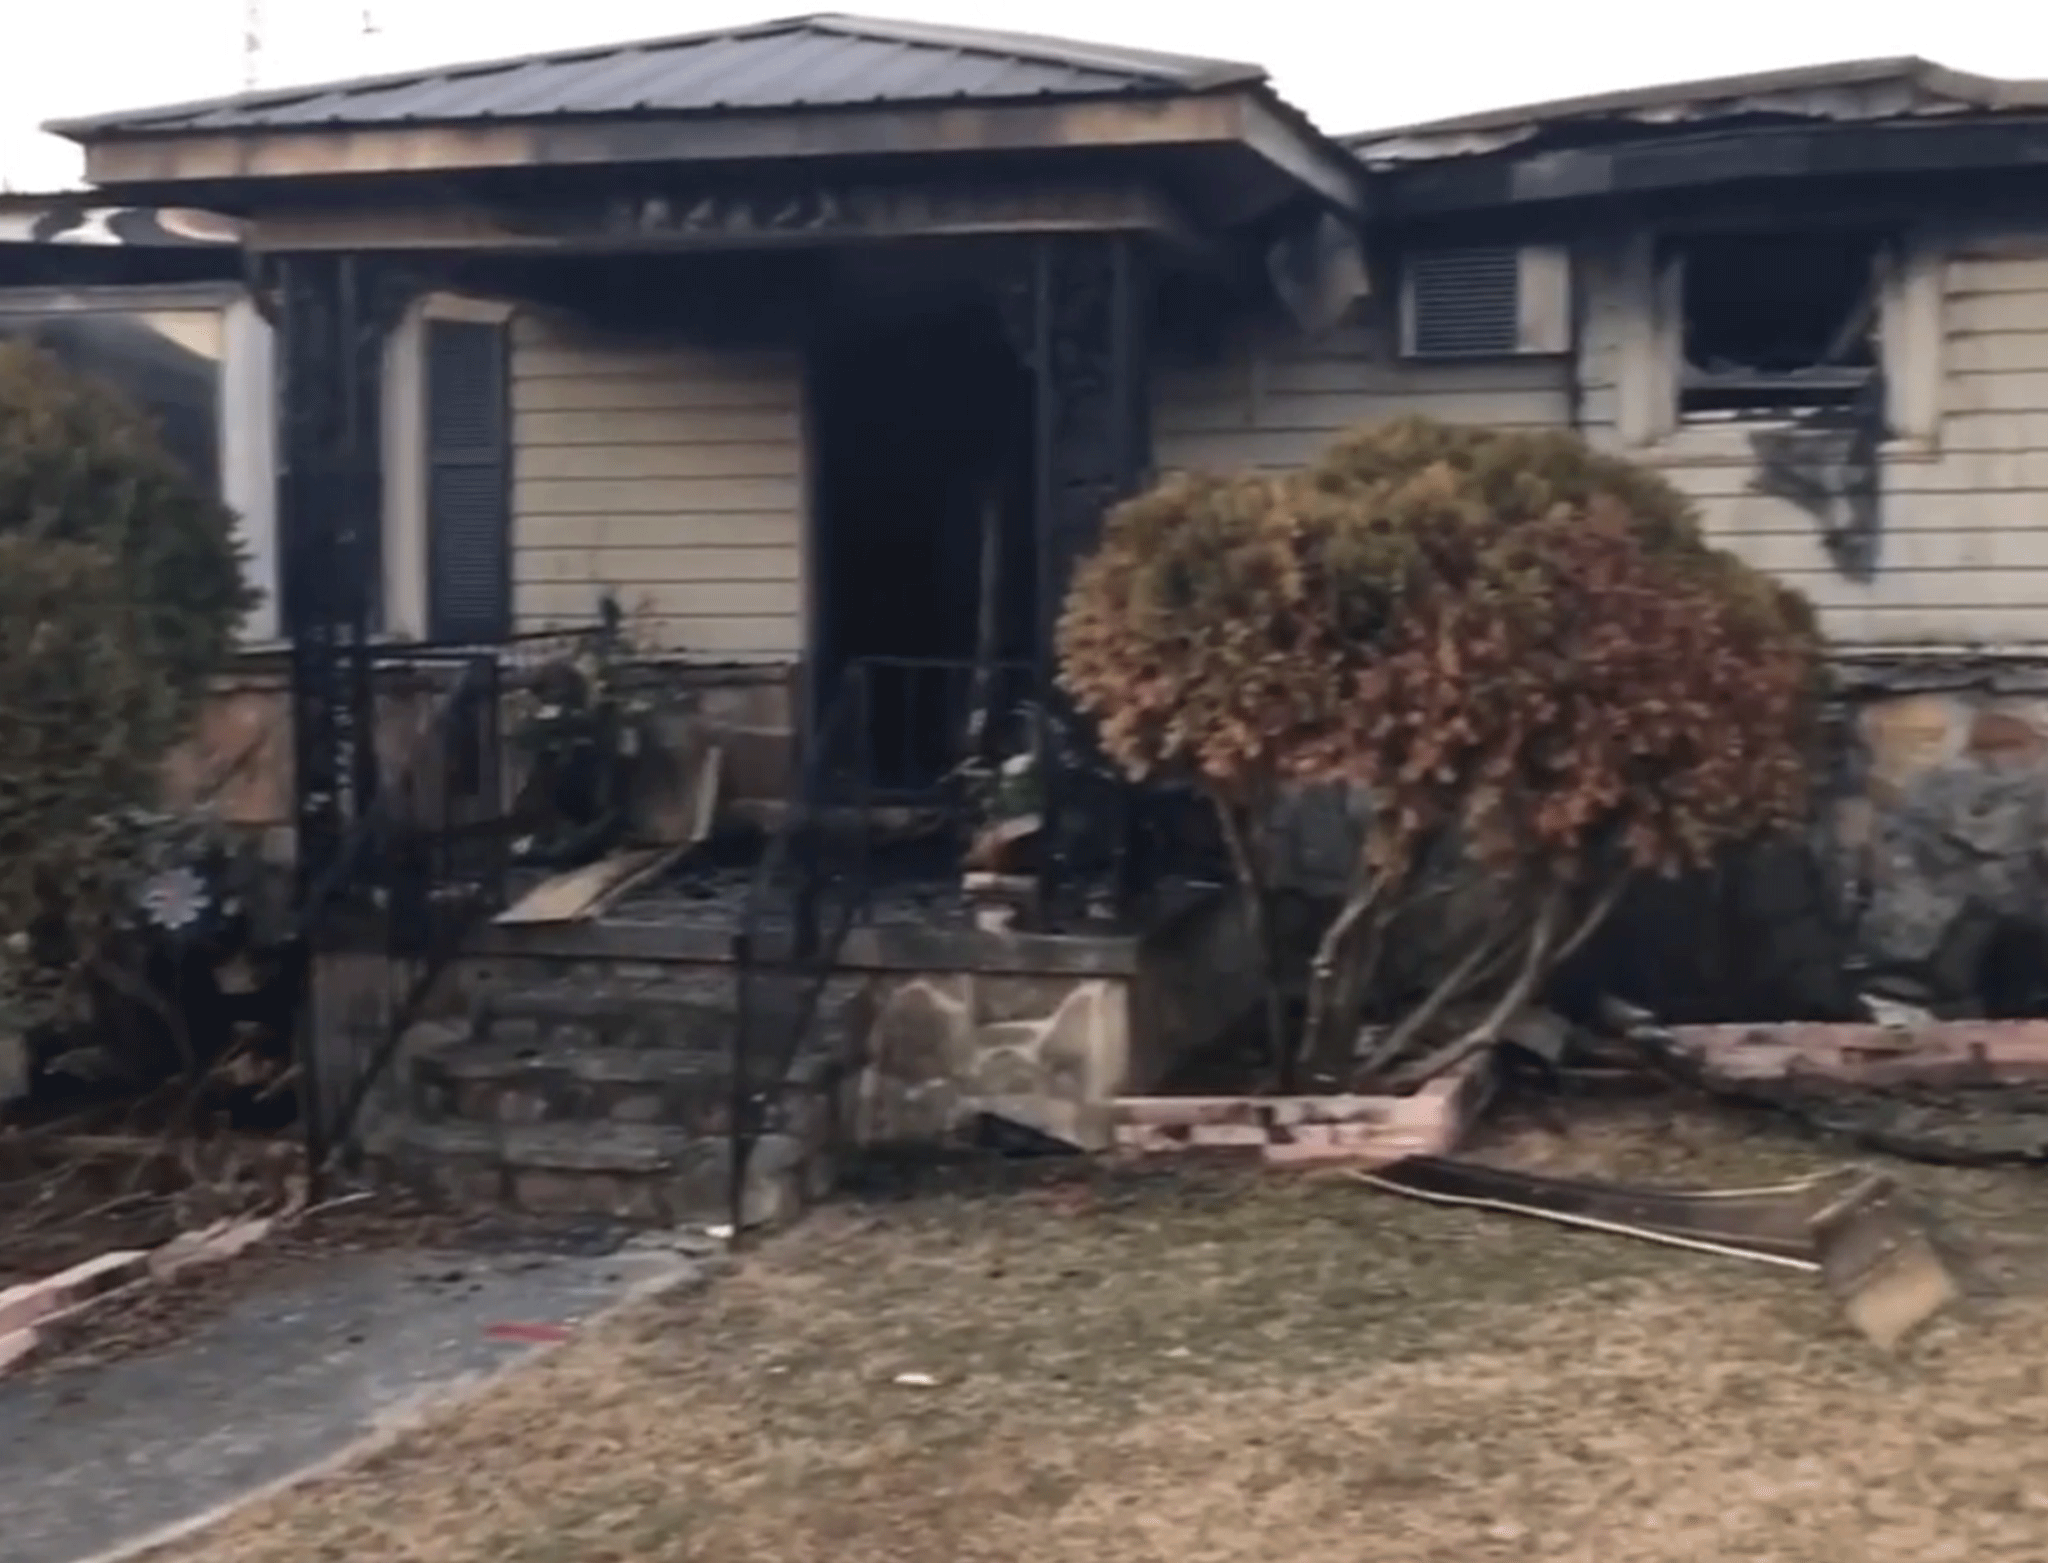 Tina Johnson's home following the fire